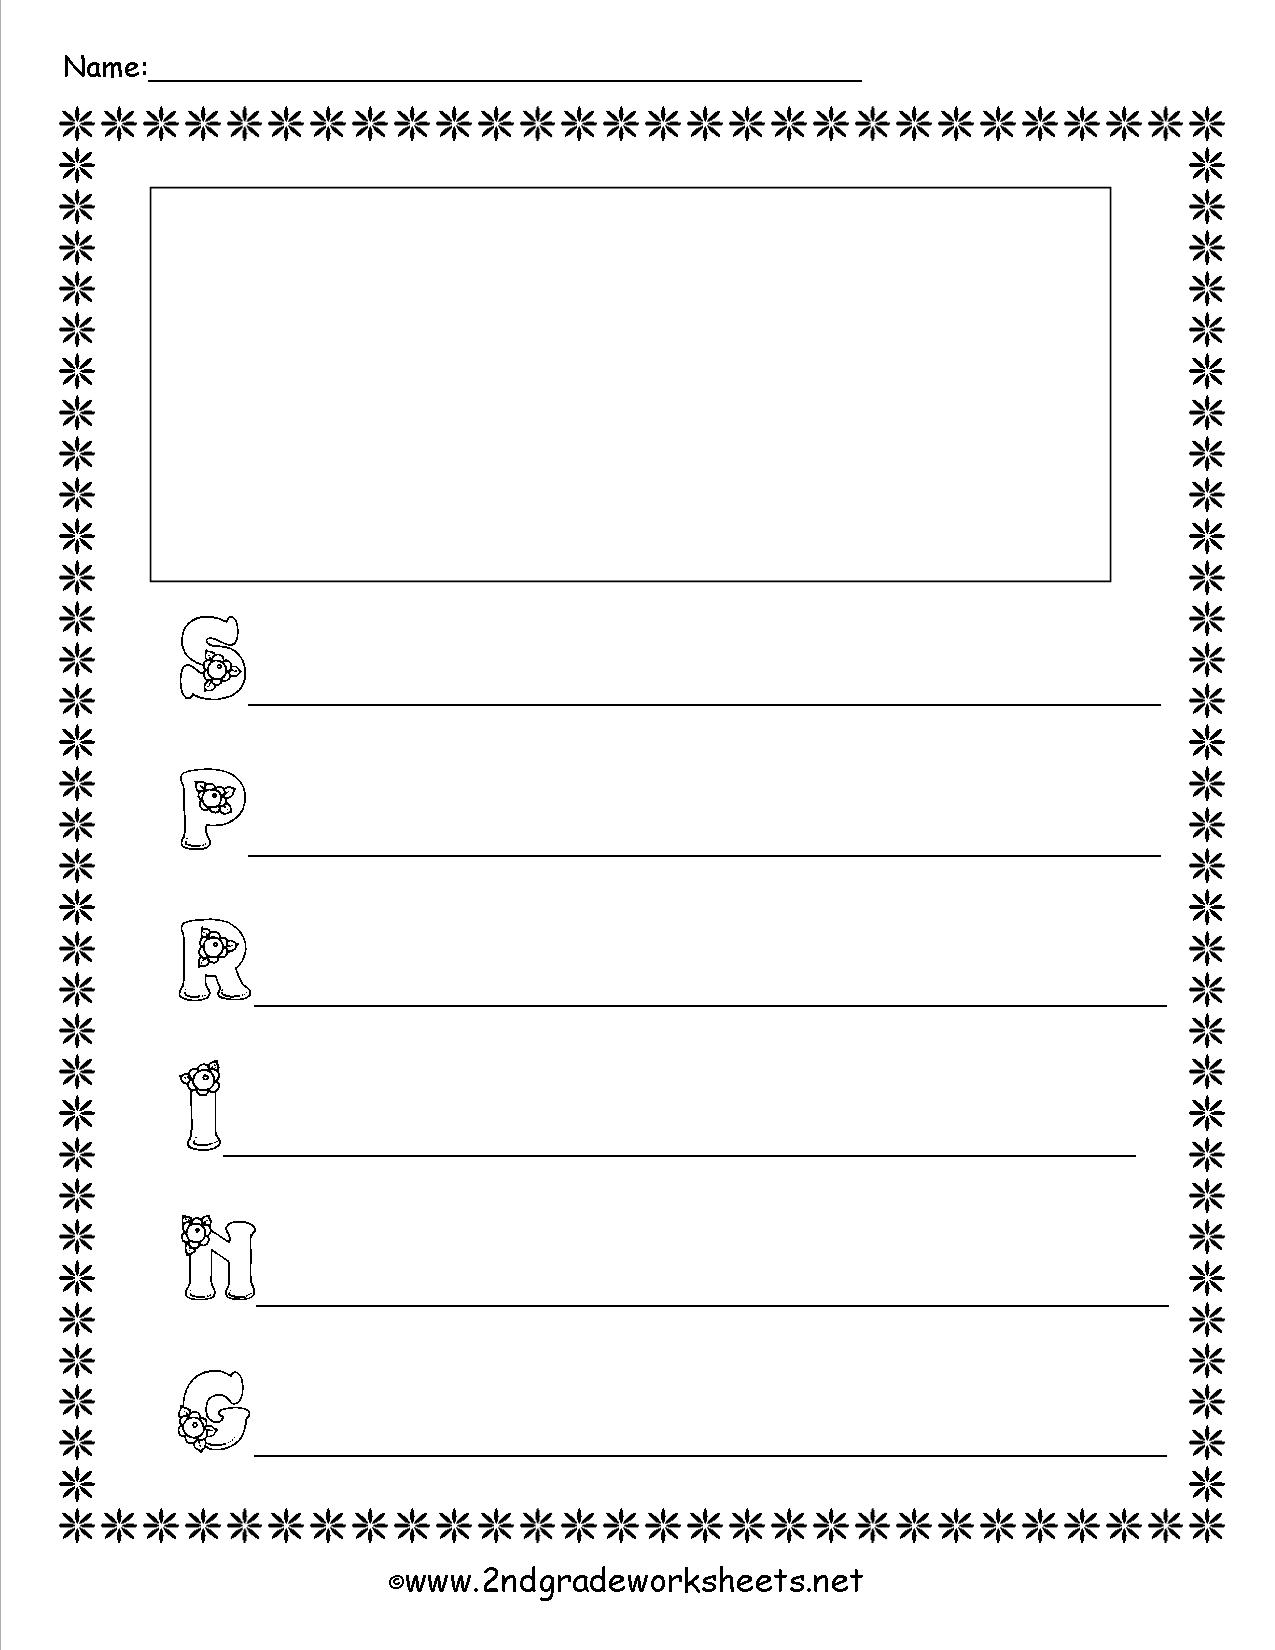 Acrostic Poem Forms, Templates, and Worksheets